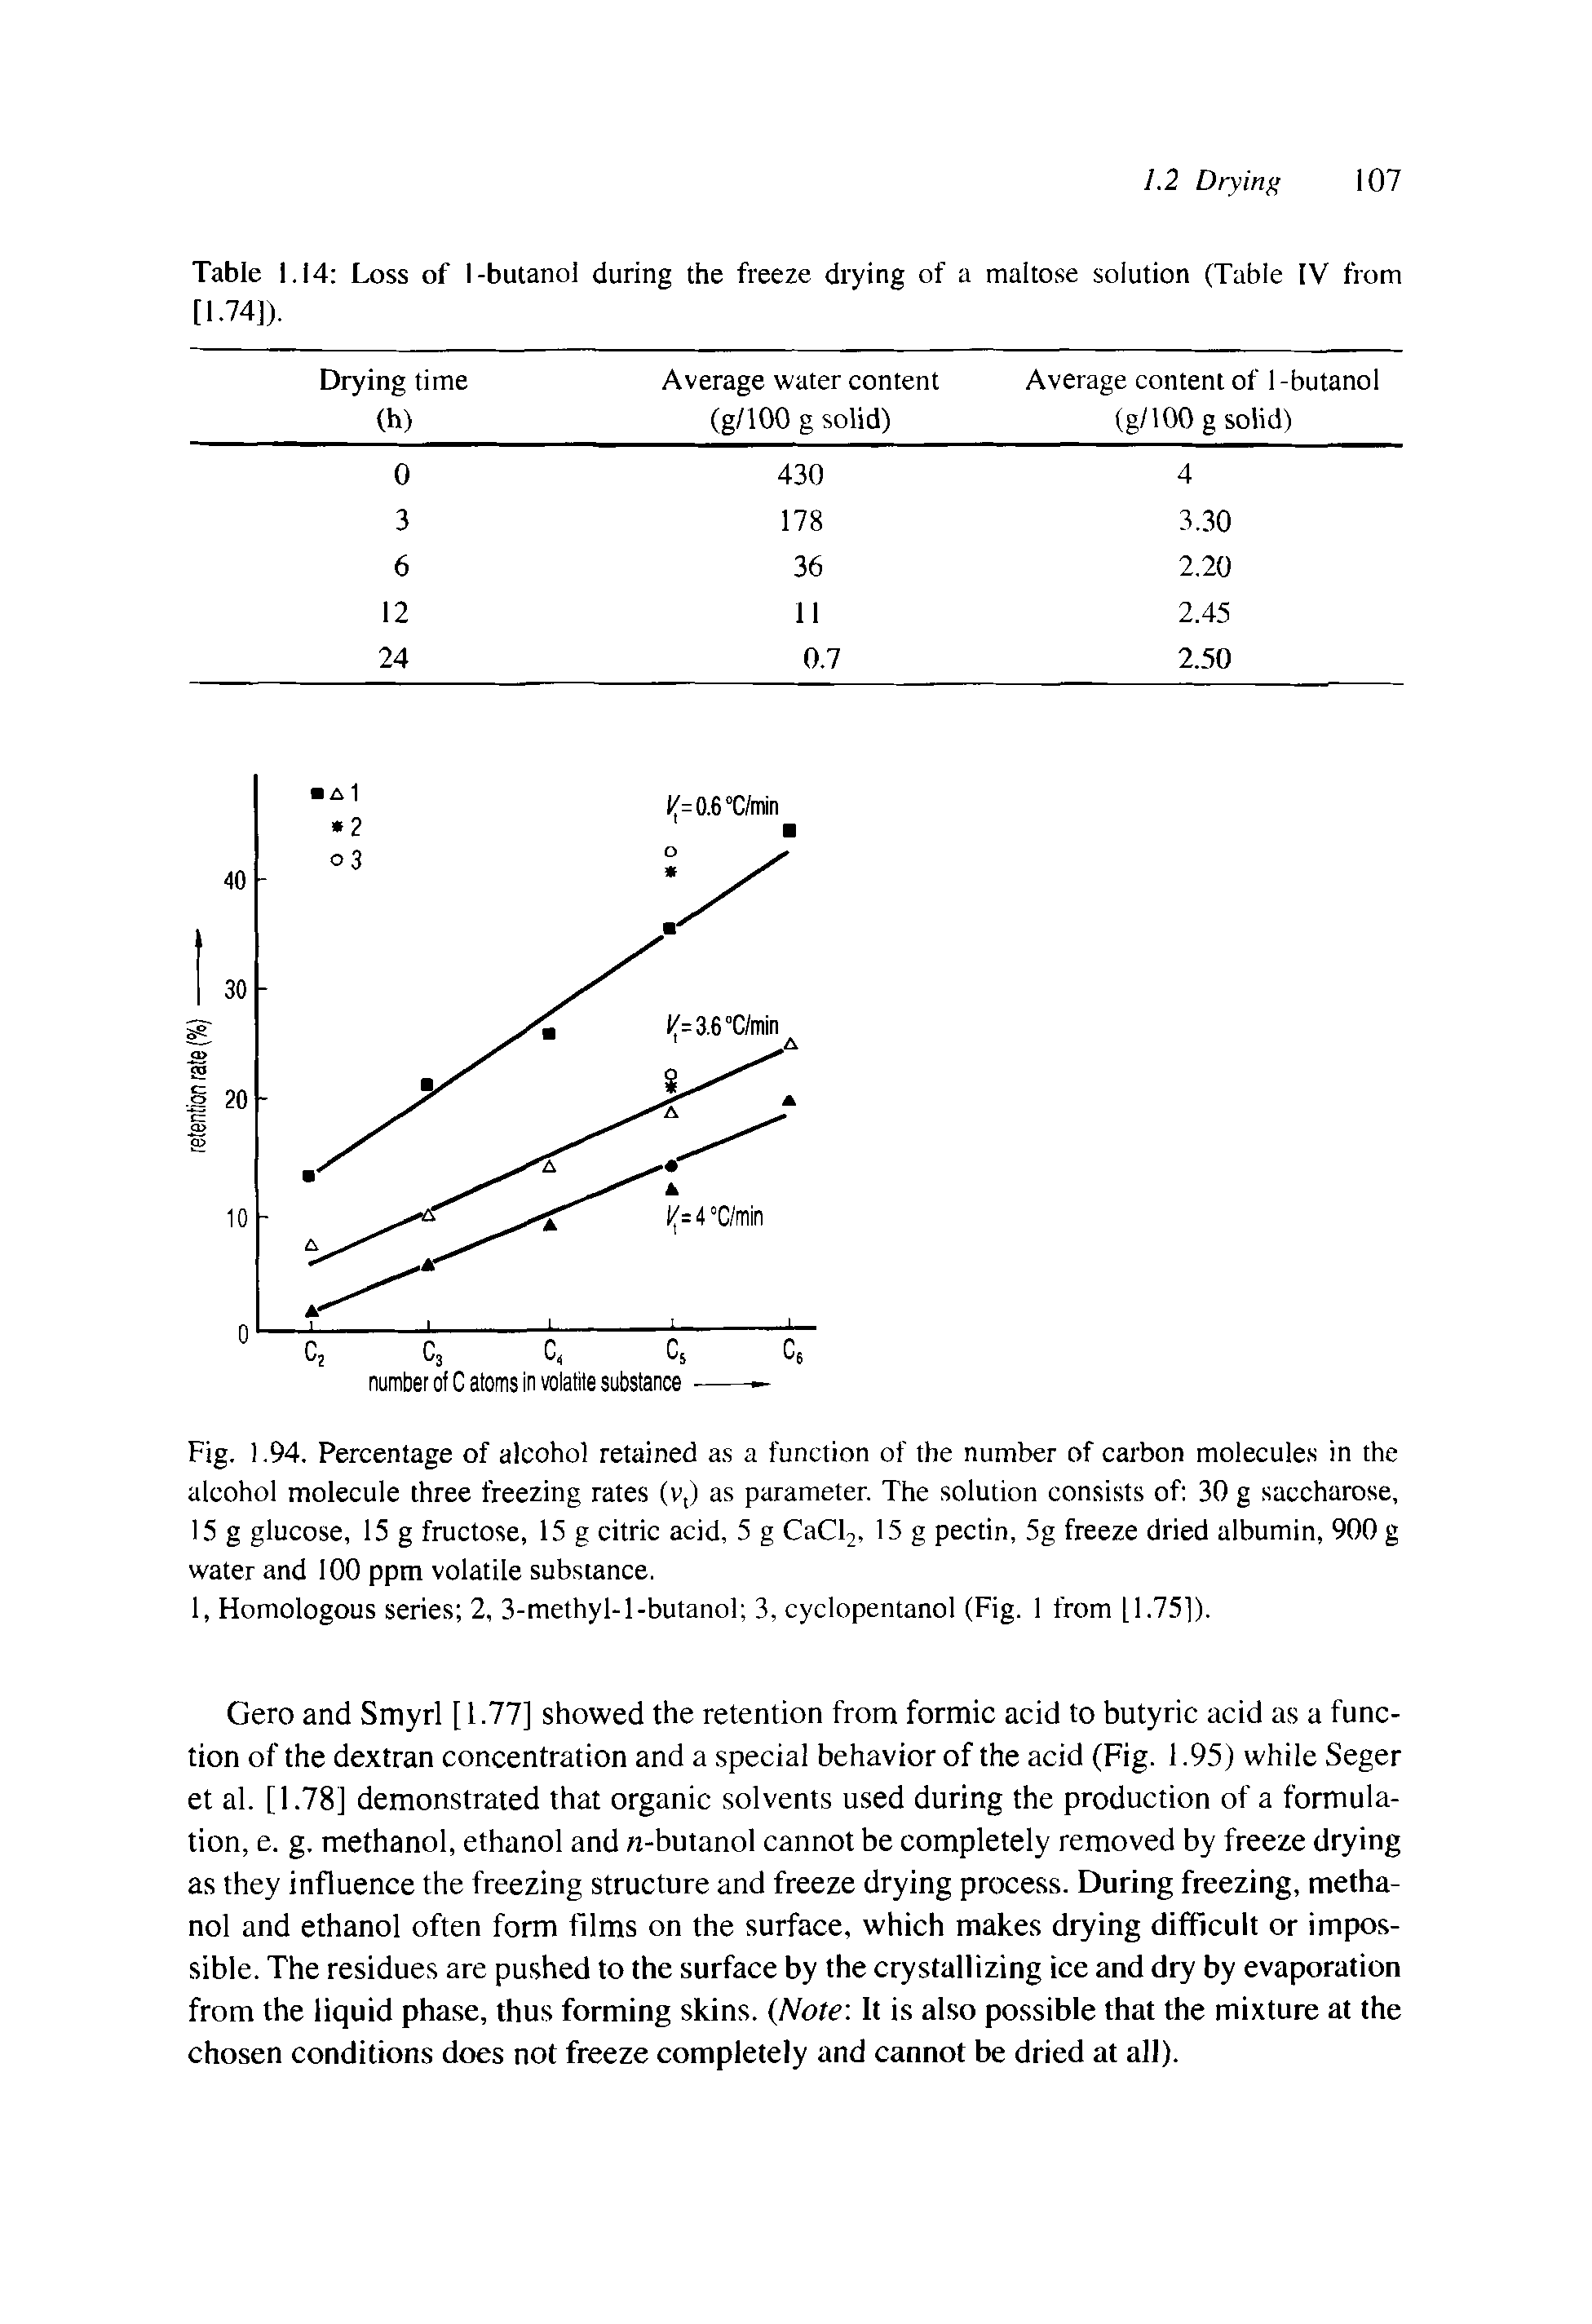 Table 1.14 Loss of I-butanol during the freeze drying of a maltose solution (Table IV from [1.74]).